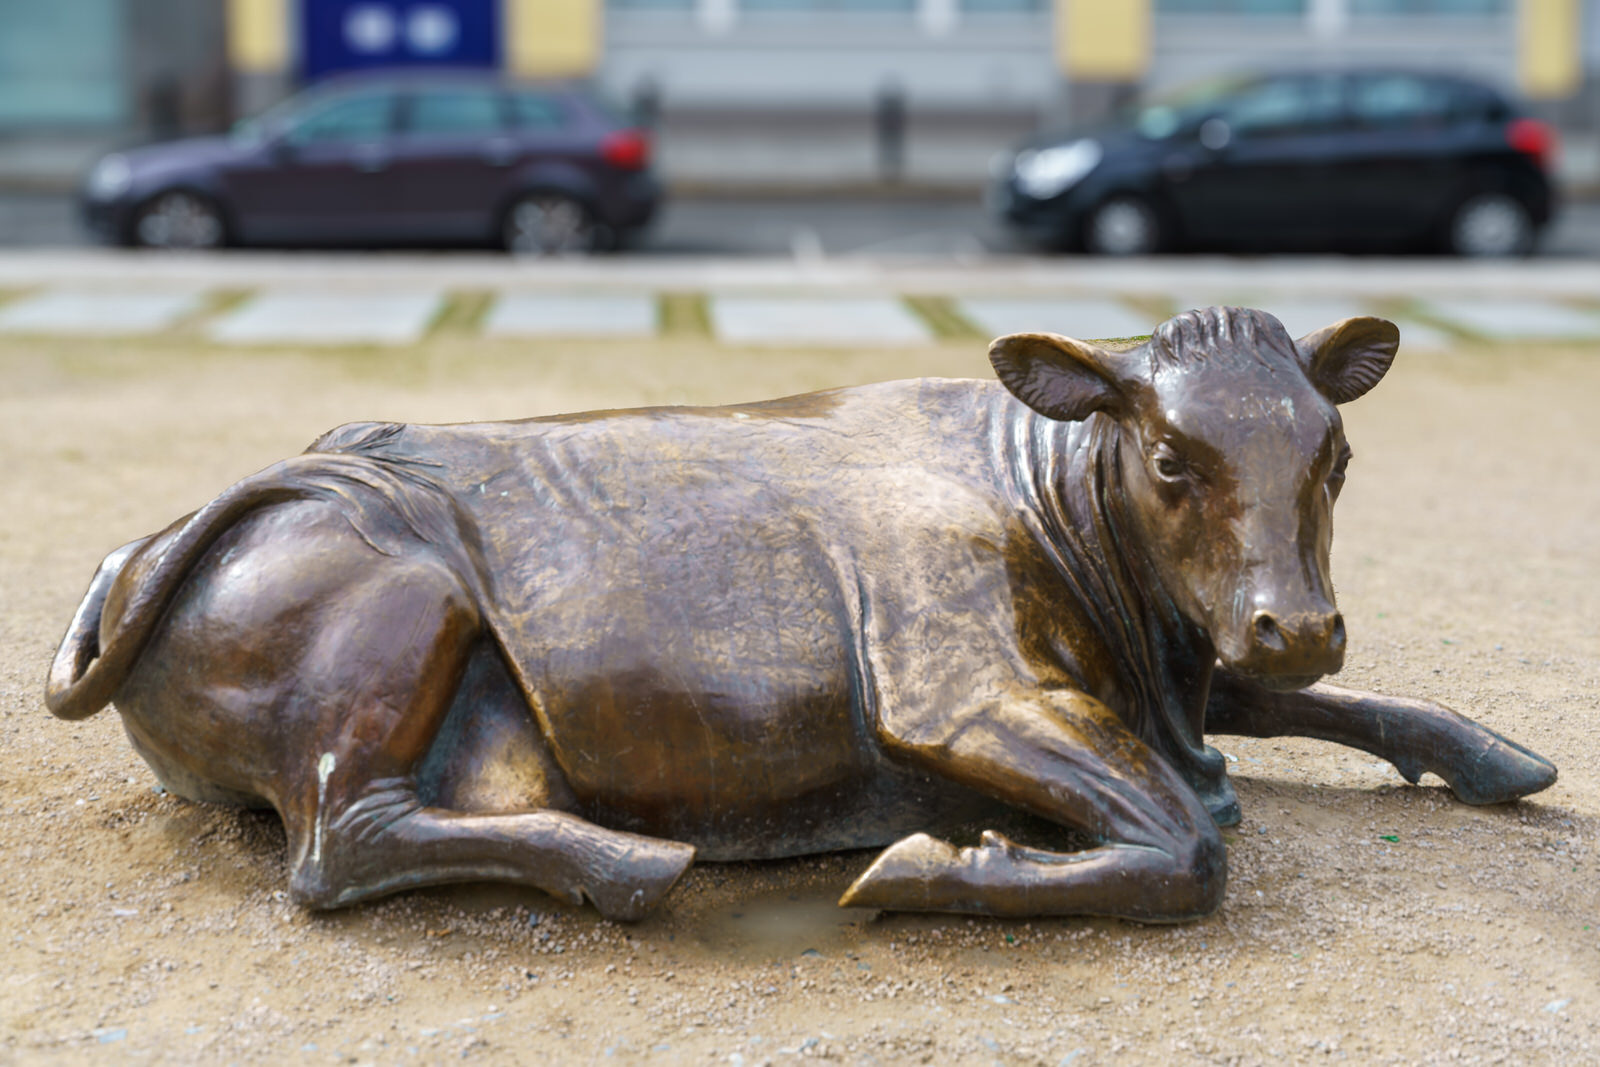 THE BRONZE COW WAS ENJOYING LIFE BACK IN 2016 [BUT IT IS NOW LONELY AS IT WAS RELOCATED TO WOOD QUAY]-233989-1